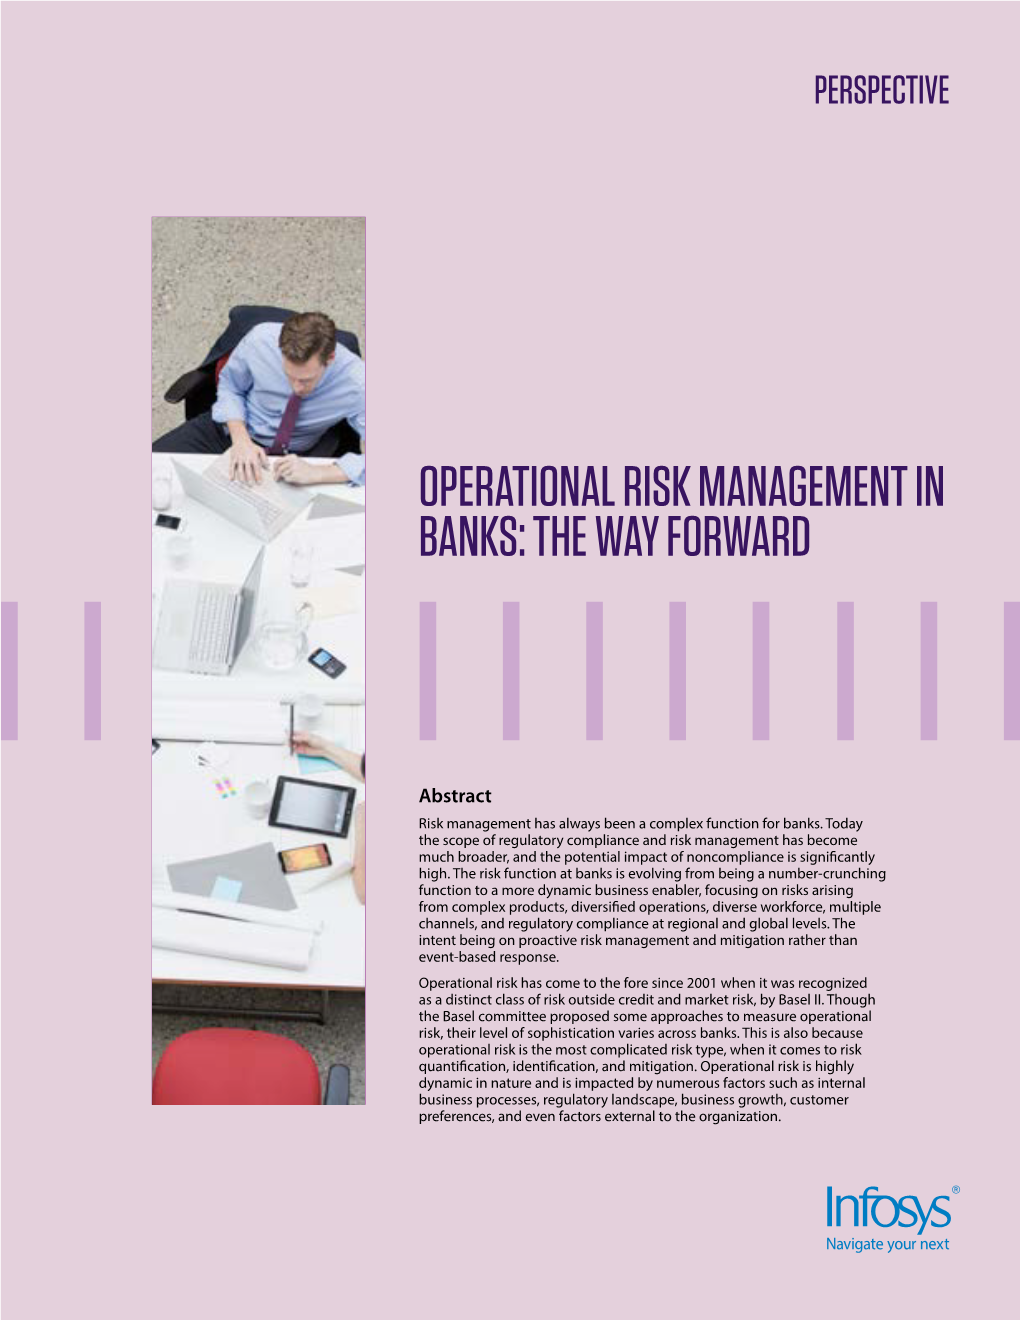 Operational Risk Management in Banks: the Way Forward